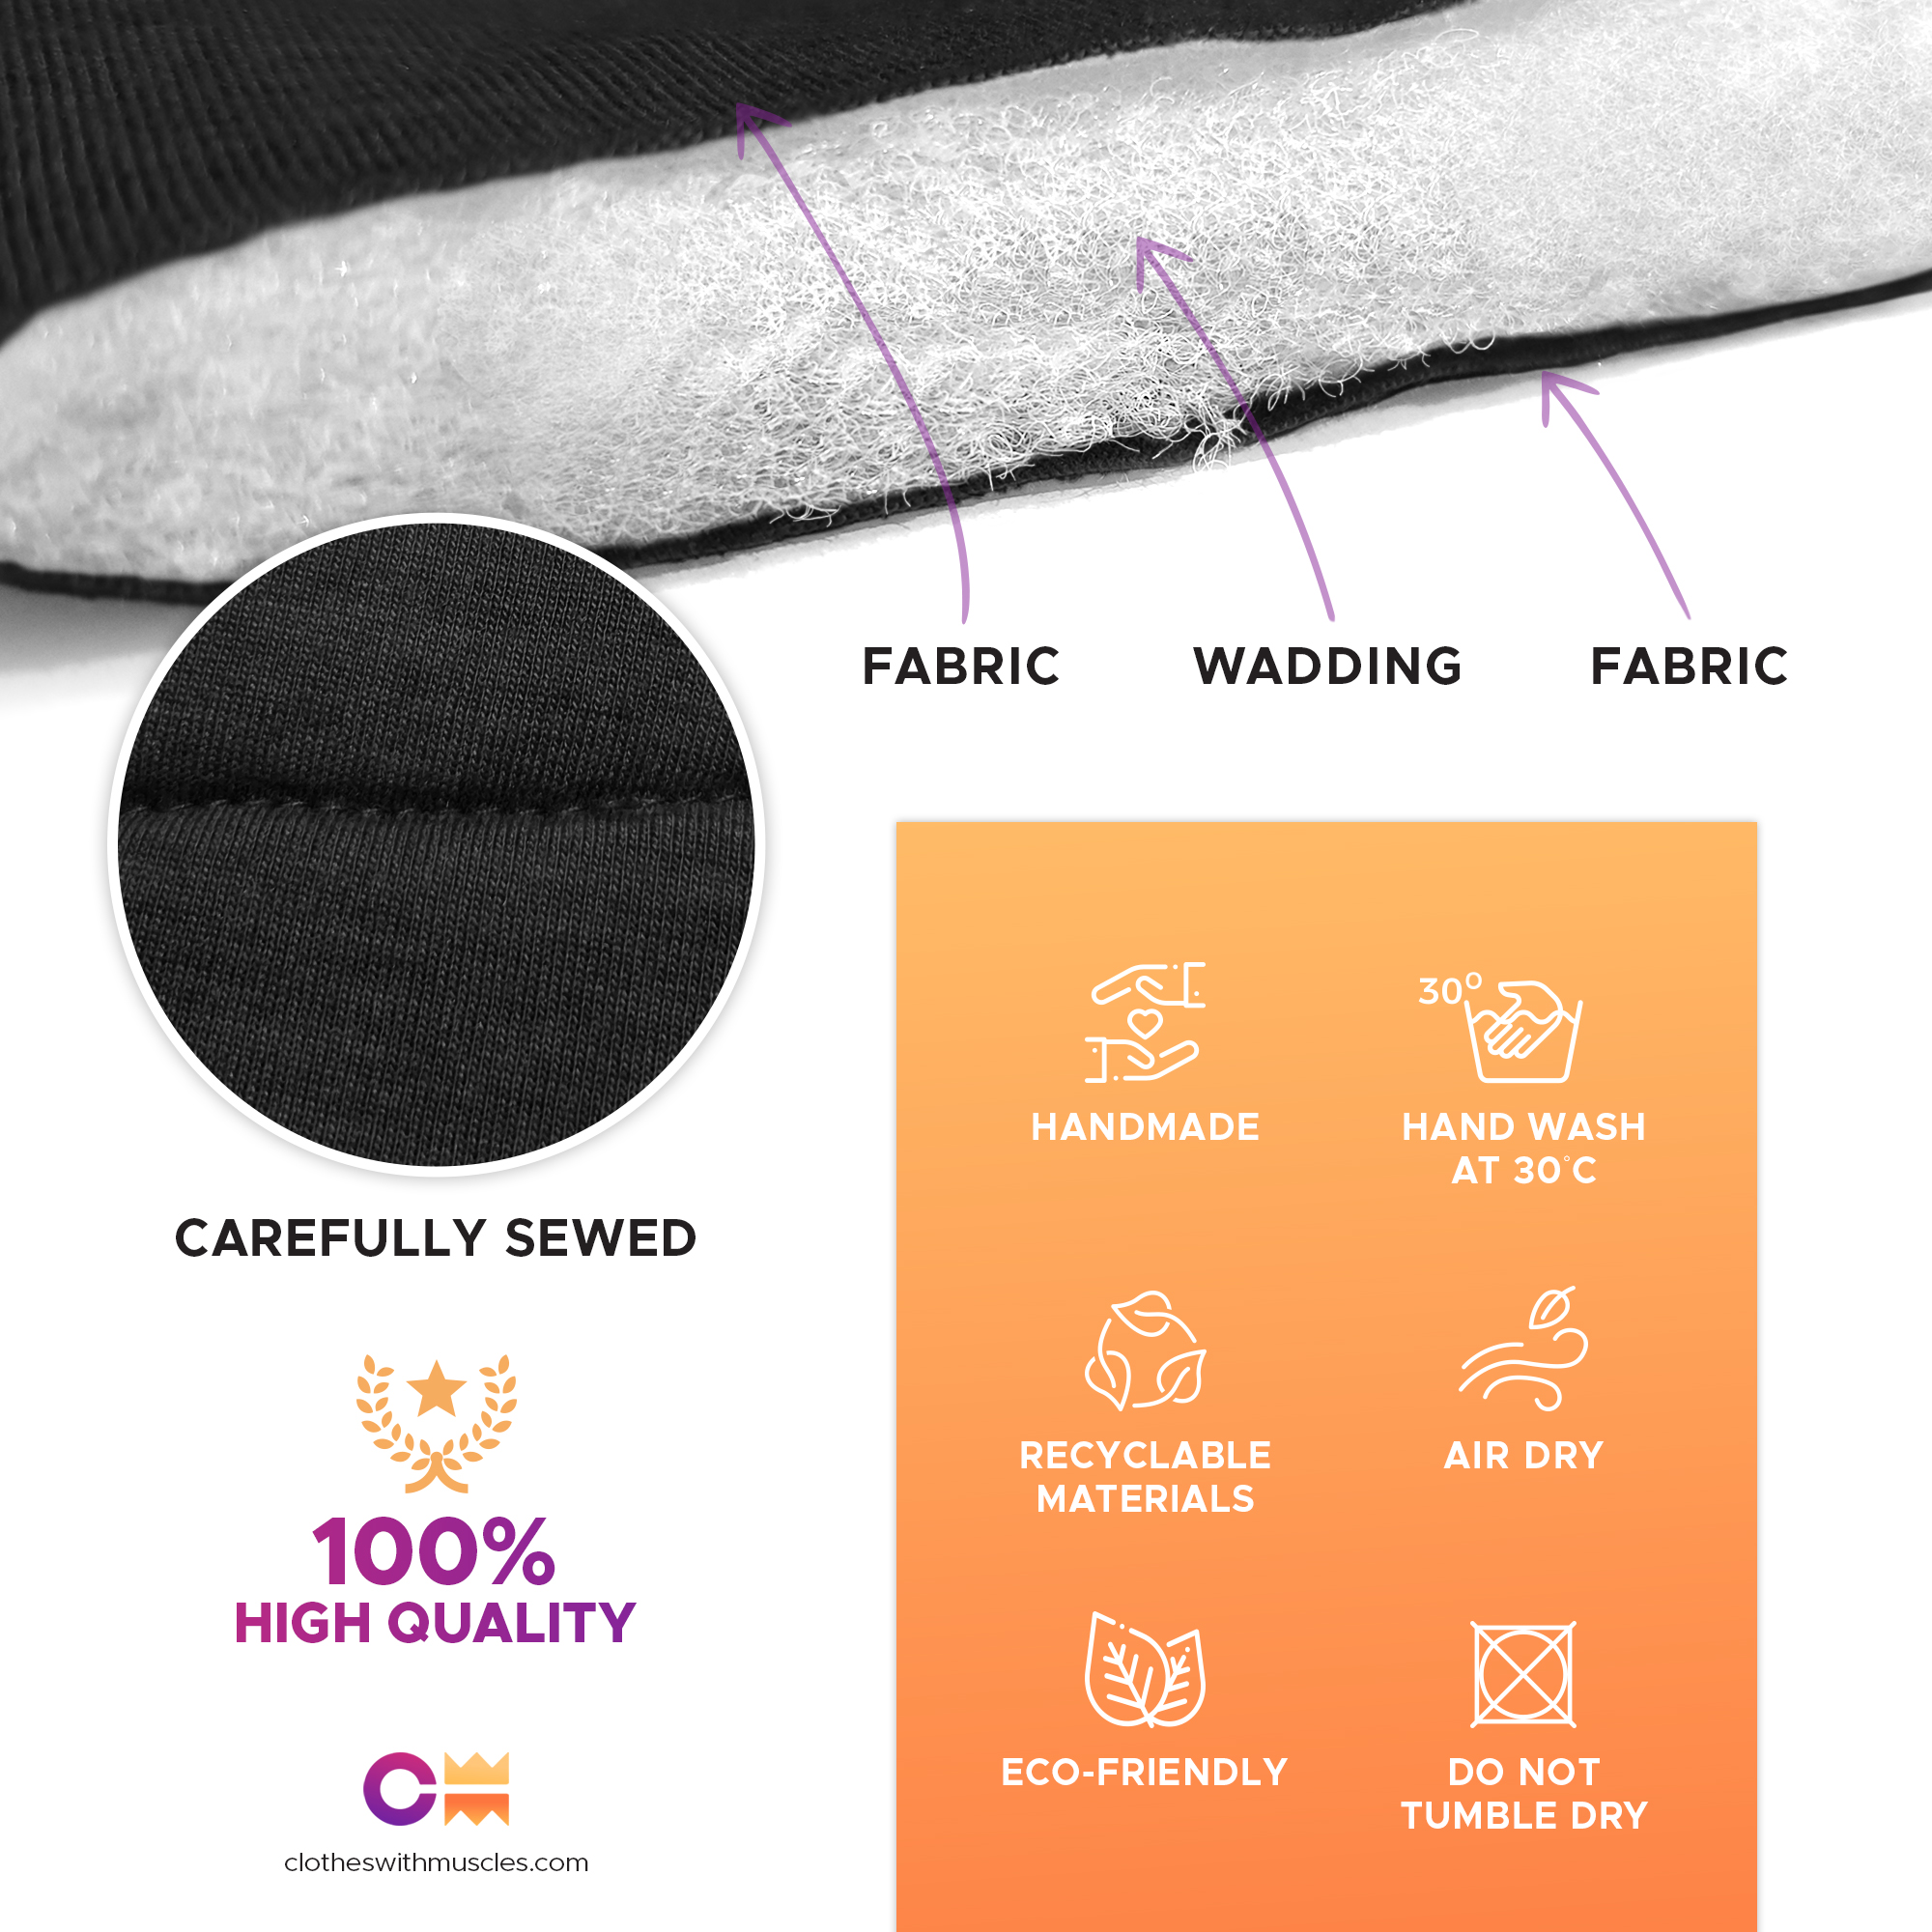 Padded Calves for Men - The #1 manufacturer of Padded Clothes with Muscles  Get the WOW Effect!